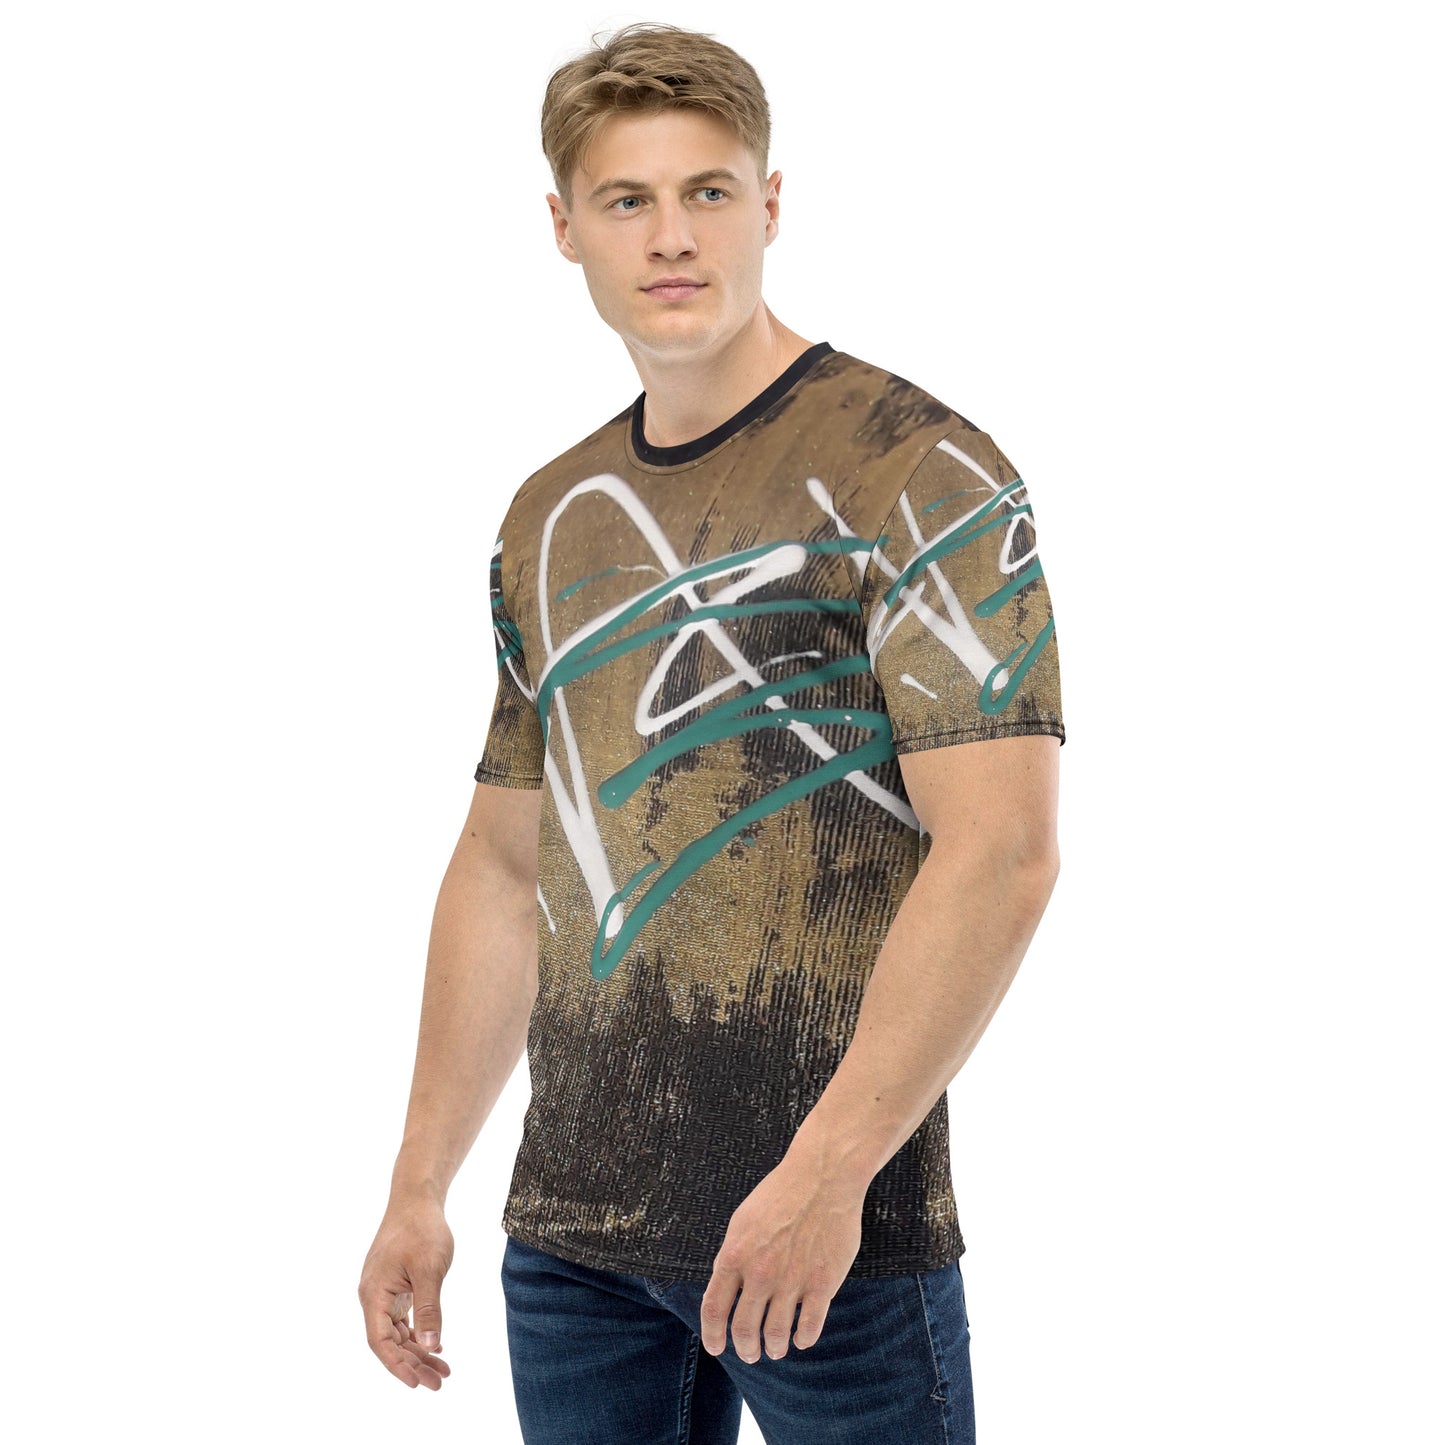 Abstract Men's T-shirt - O By Onica Online Store